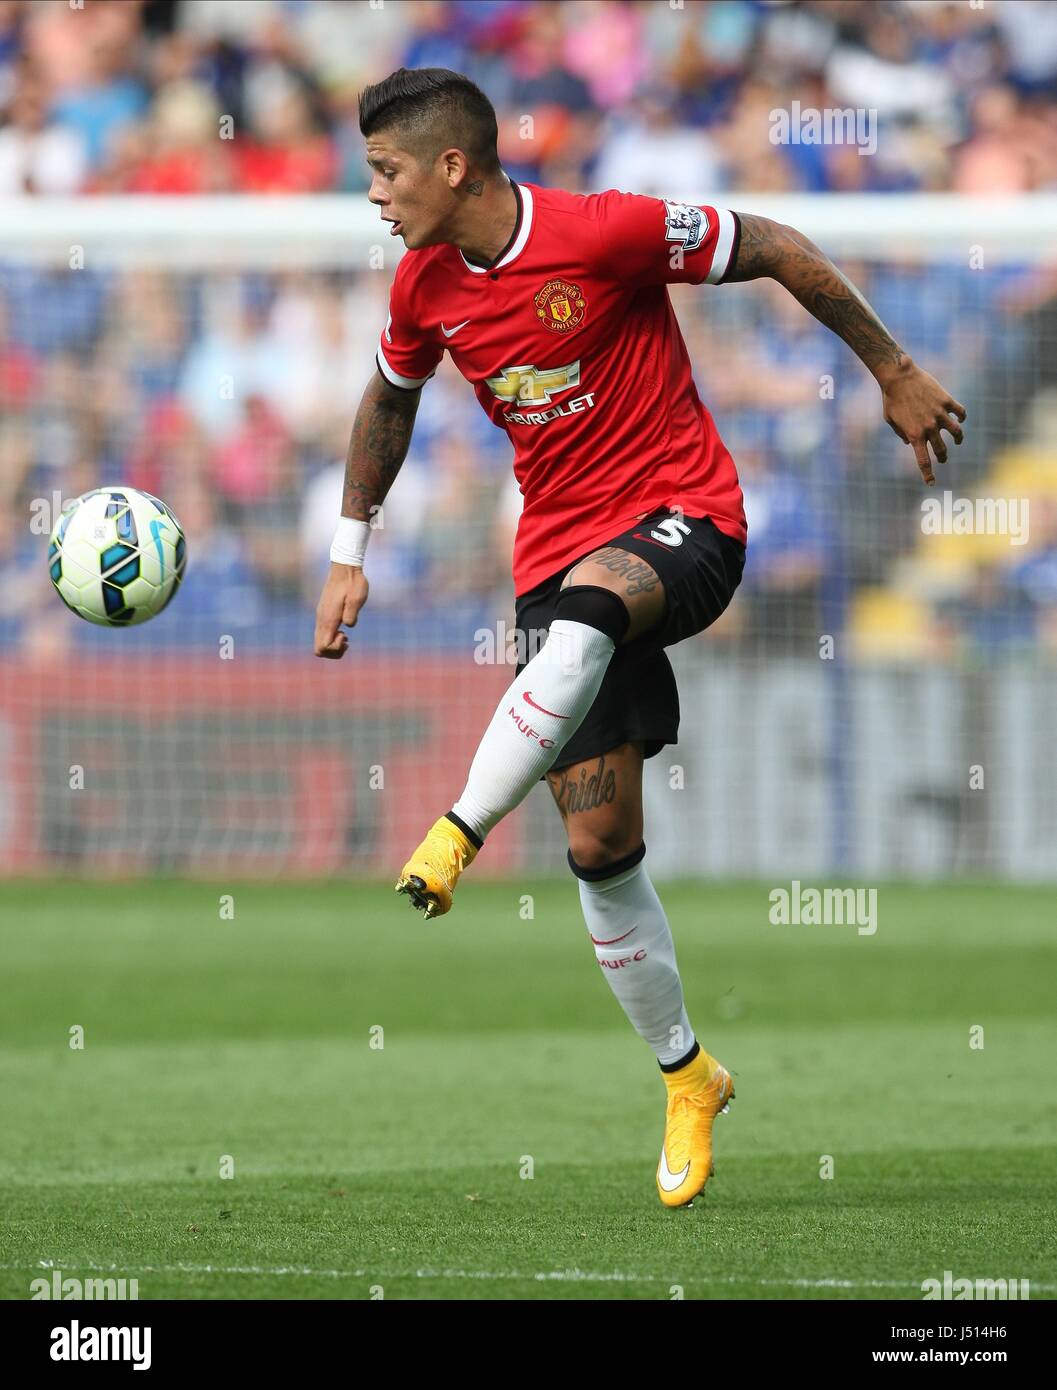 MARCOS ROJO MANCHESTER UNITED FC MANCHESTER UNITED FC THE KING POWER STADIUM LEICESTER ENGLAND 21 September 2014 Stock Photo